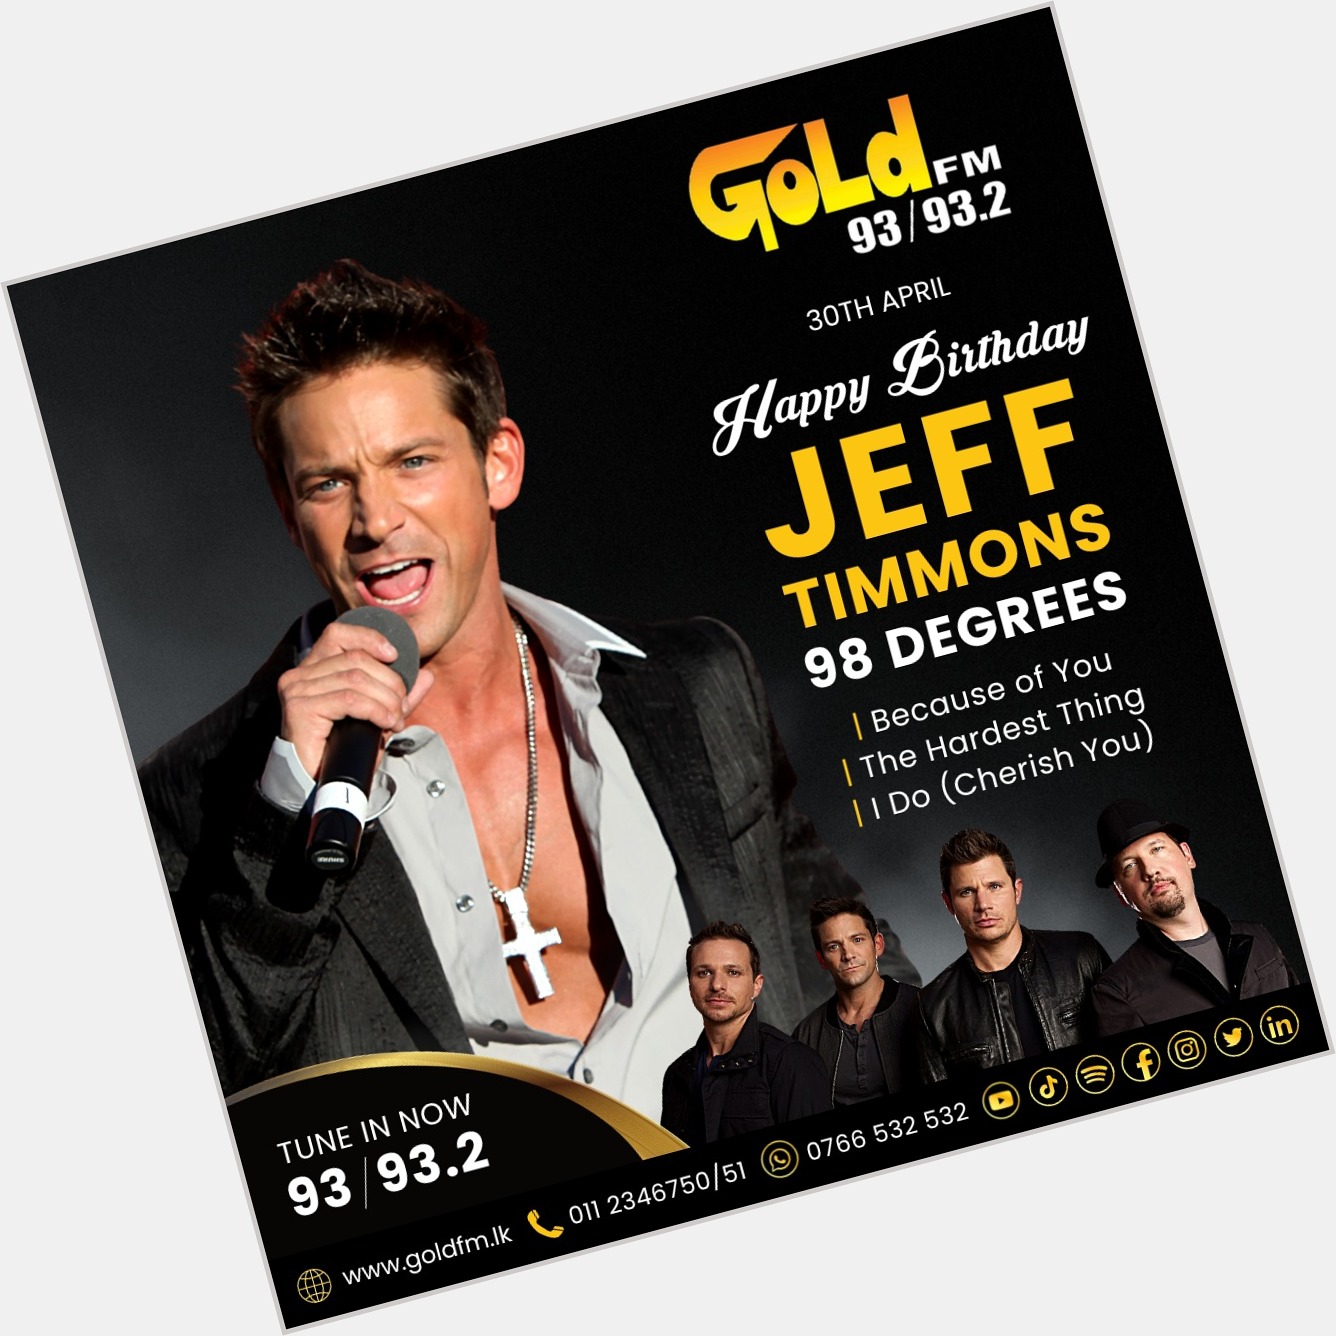 HAPPY BIRTHDAY TO JEFF TIMMONS TUNE IN NOW 93 / 93.2 Island wide     